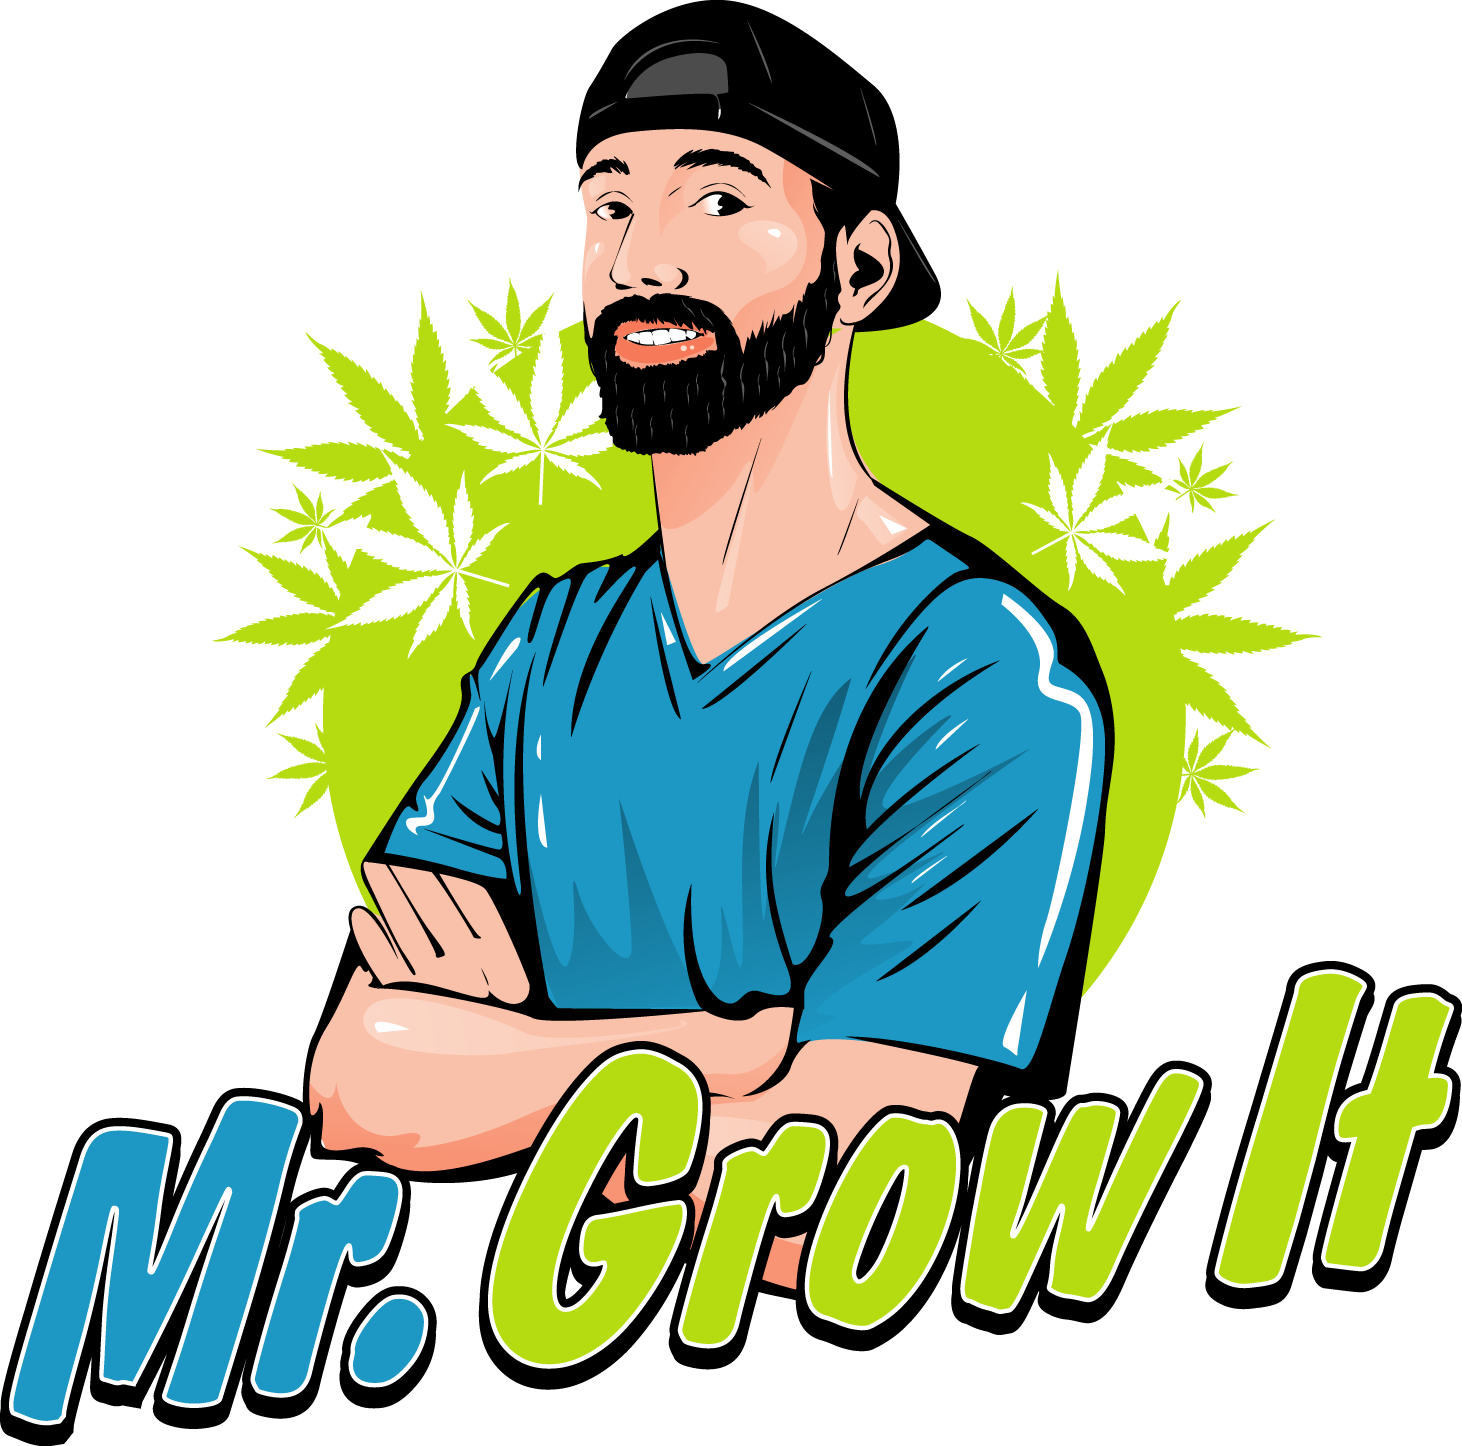 Mr Grow It has offered his expert advice and insights for this video and article